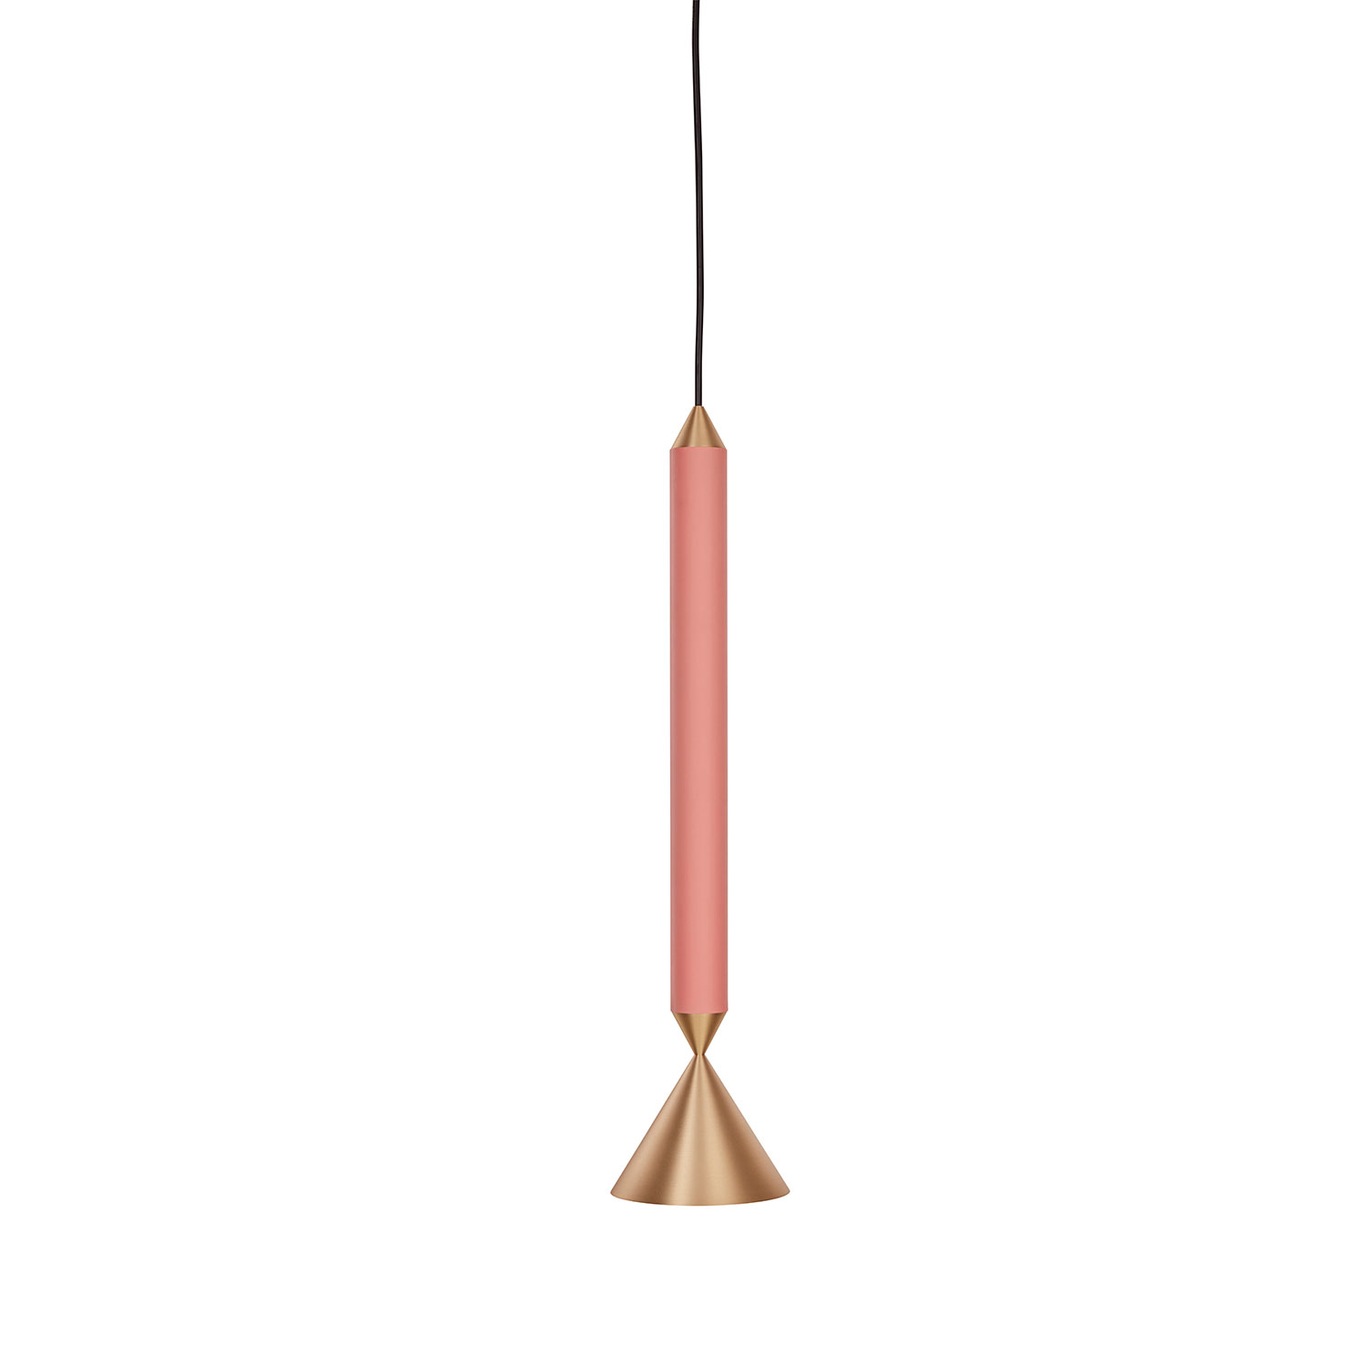 Apollo 39 Pendel, Coral Pink / Brushed Brass